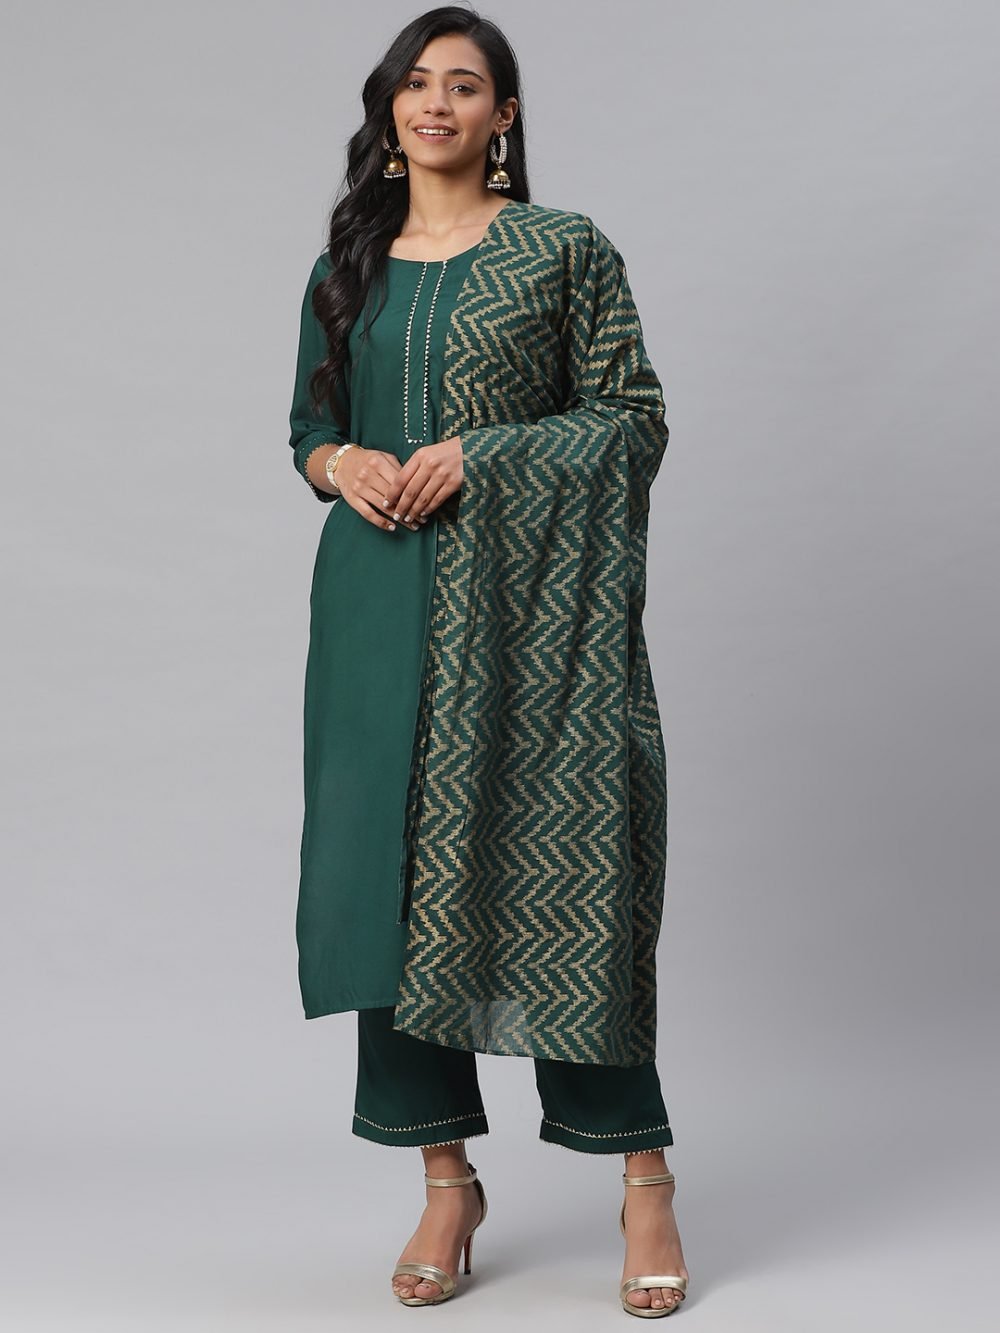 Ethnic Suits for Women | Suit Sets for Women - Westside – Page 6